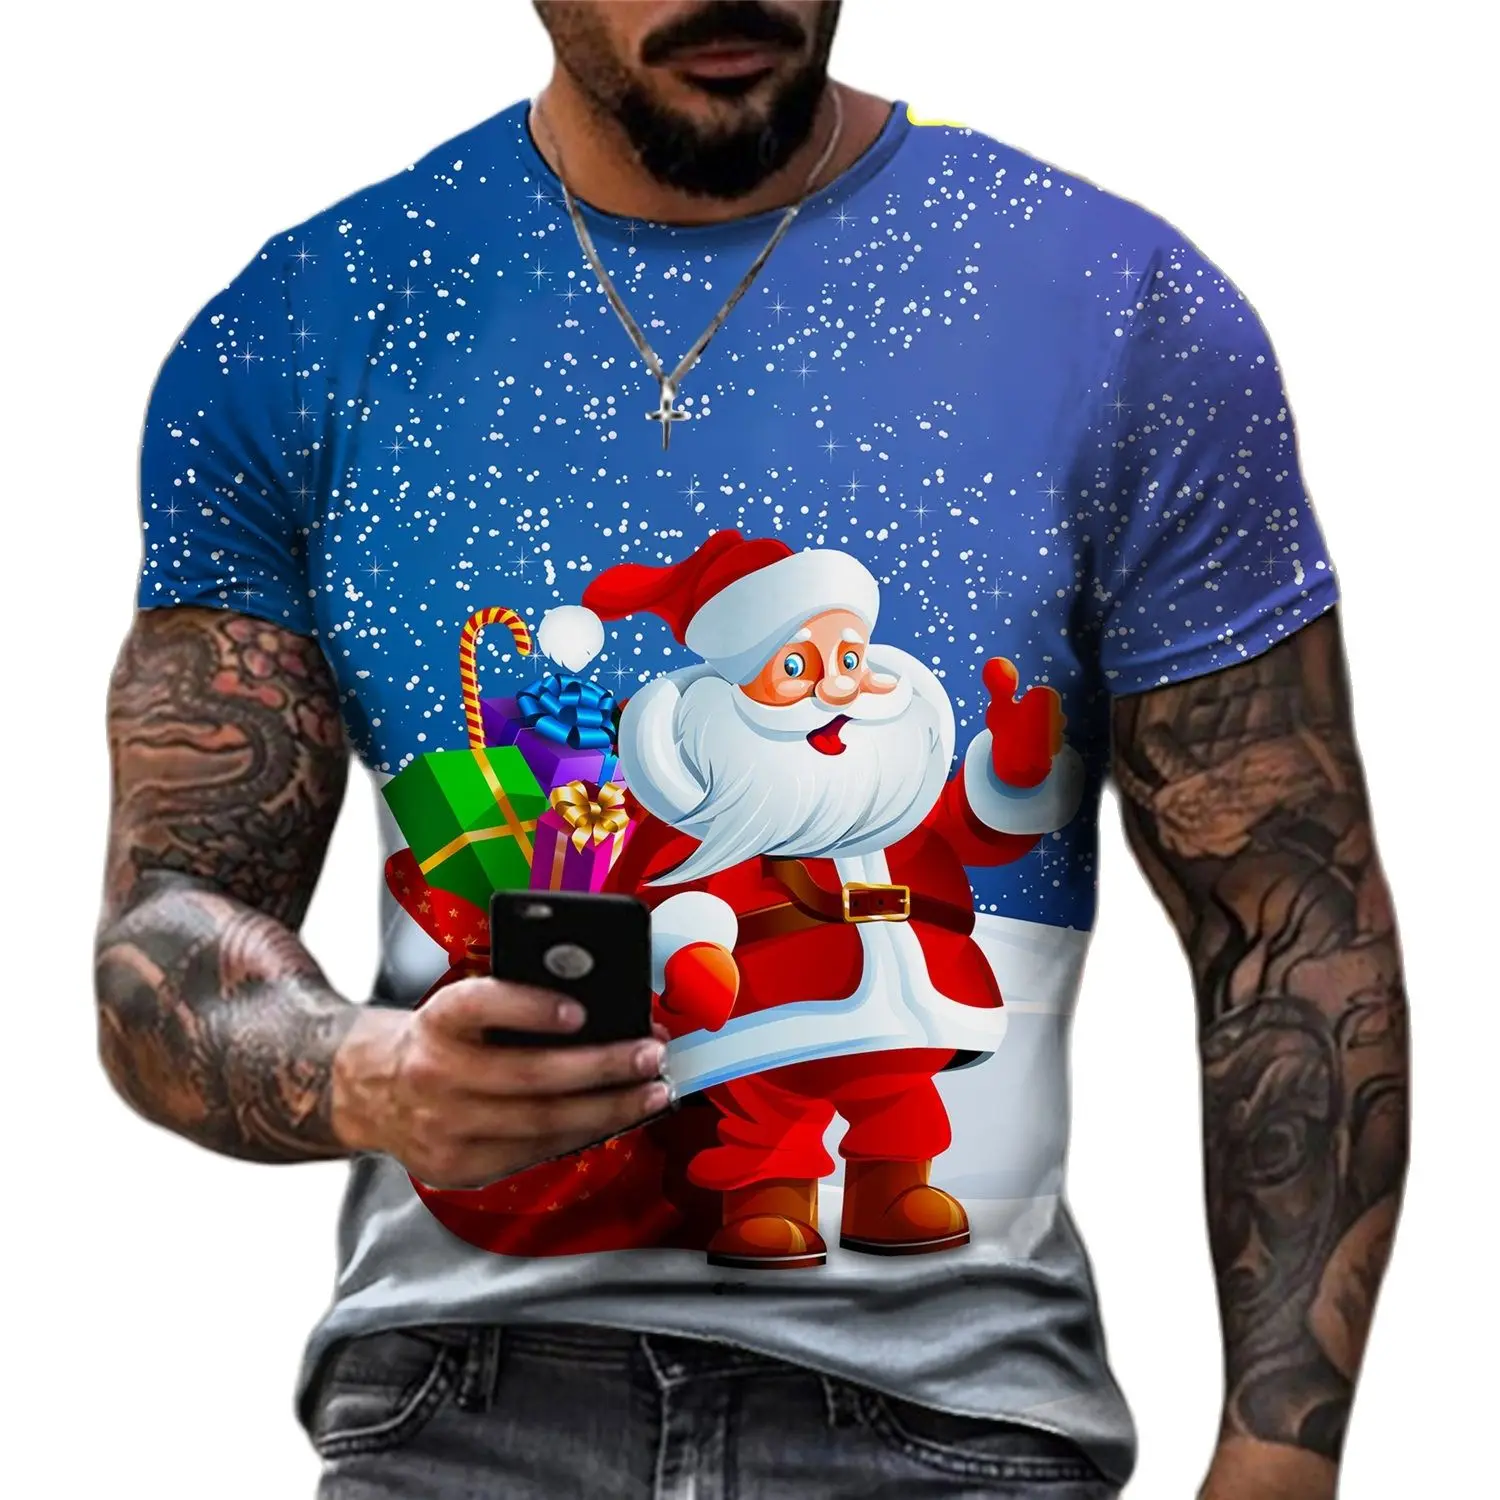 Personality Fashion Christmas T-shirt Funny Cartoon Santa Claus 3d Printed Short Sleeve Christmas Eve Casual Tee Tops delores fossen lone star christmas cowboy christmas eve book 1 unabridged